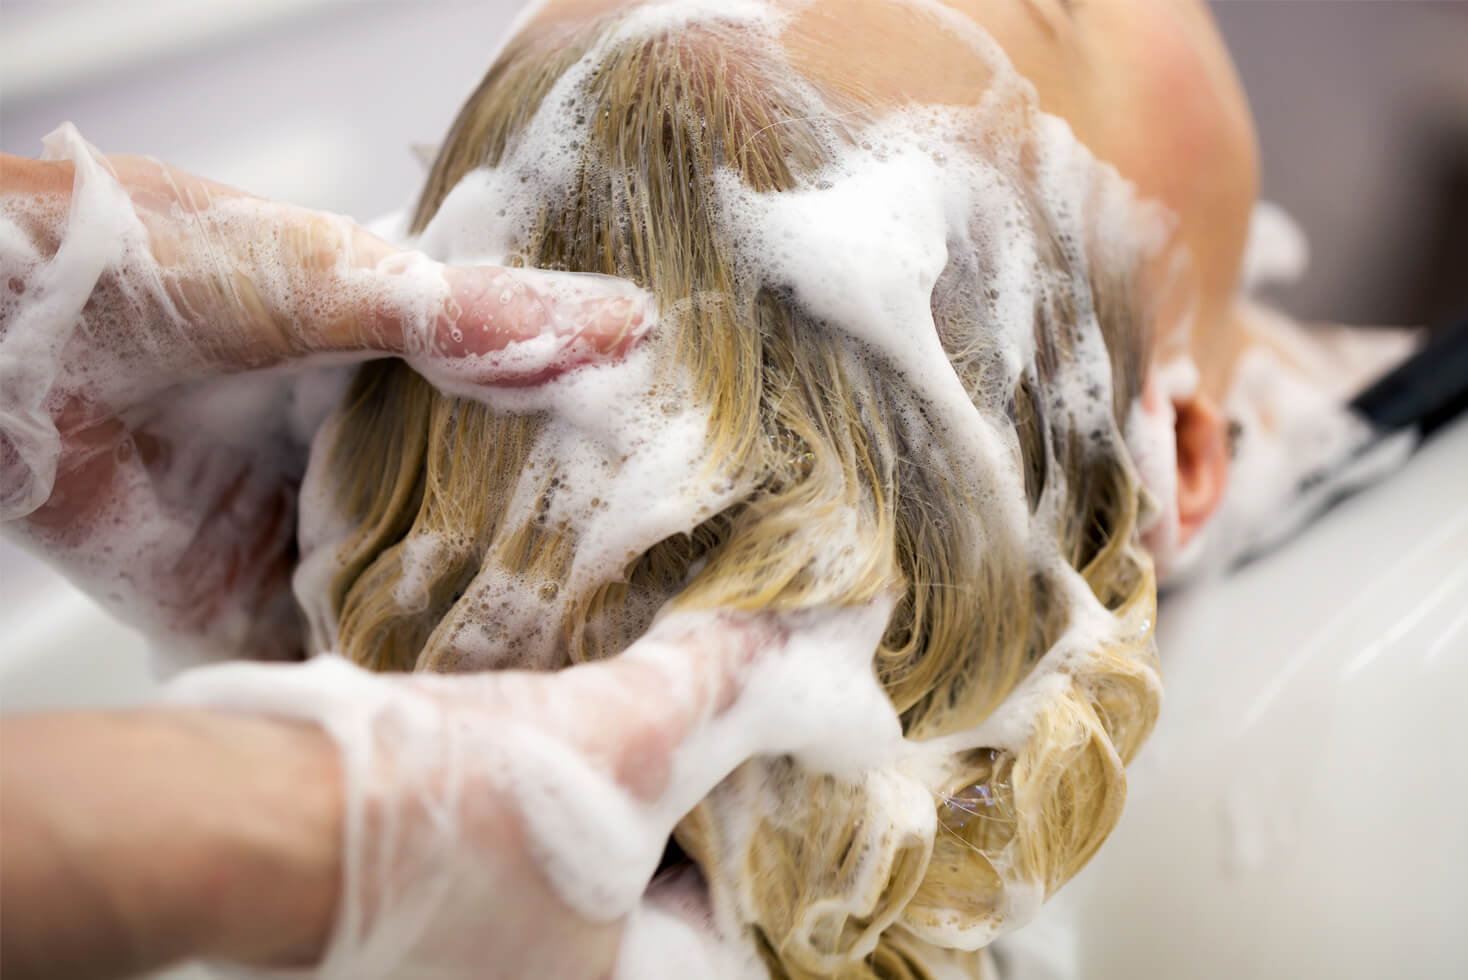 what does clarifying shampoo do to bleached hair